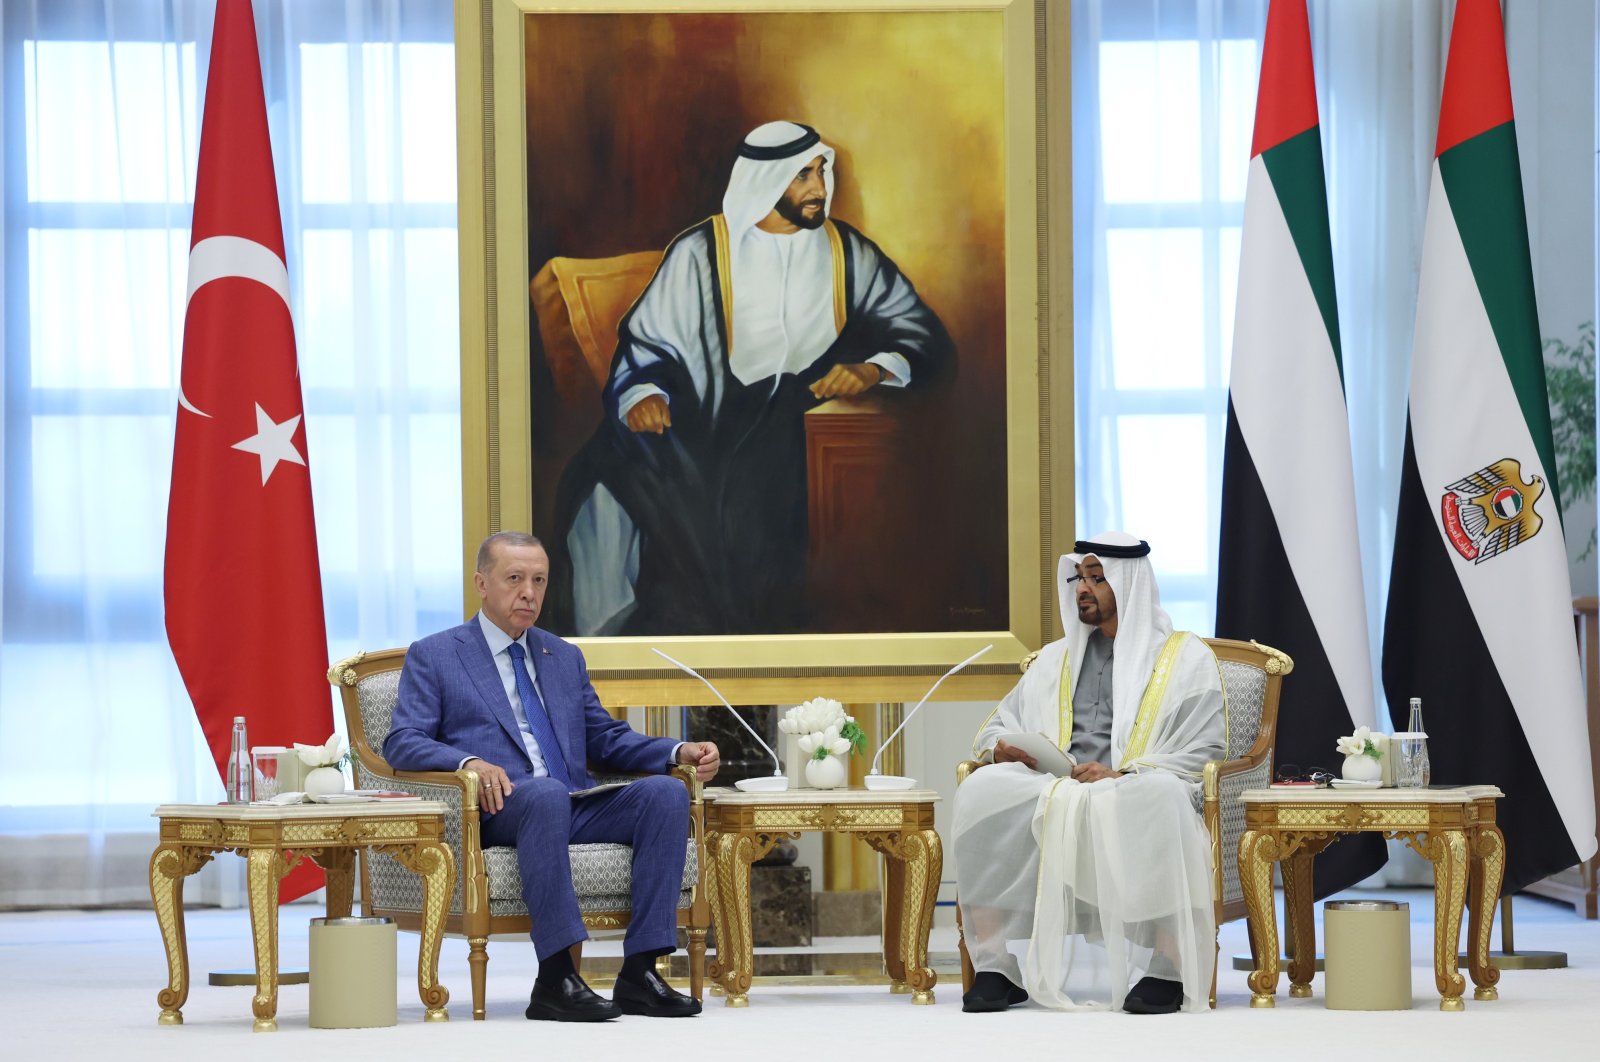 Sheikh Mohammed bin Zayed Al Nahyan, president of the United Arab Emirates, hosts an official reception for President Recep Tayyip Erdoğan, at Qasr Al Watan in Abu Dhabi, United Arab Emirates, July 19, 2023. (IHA Photo)